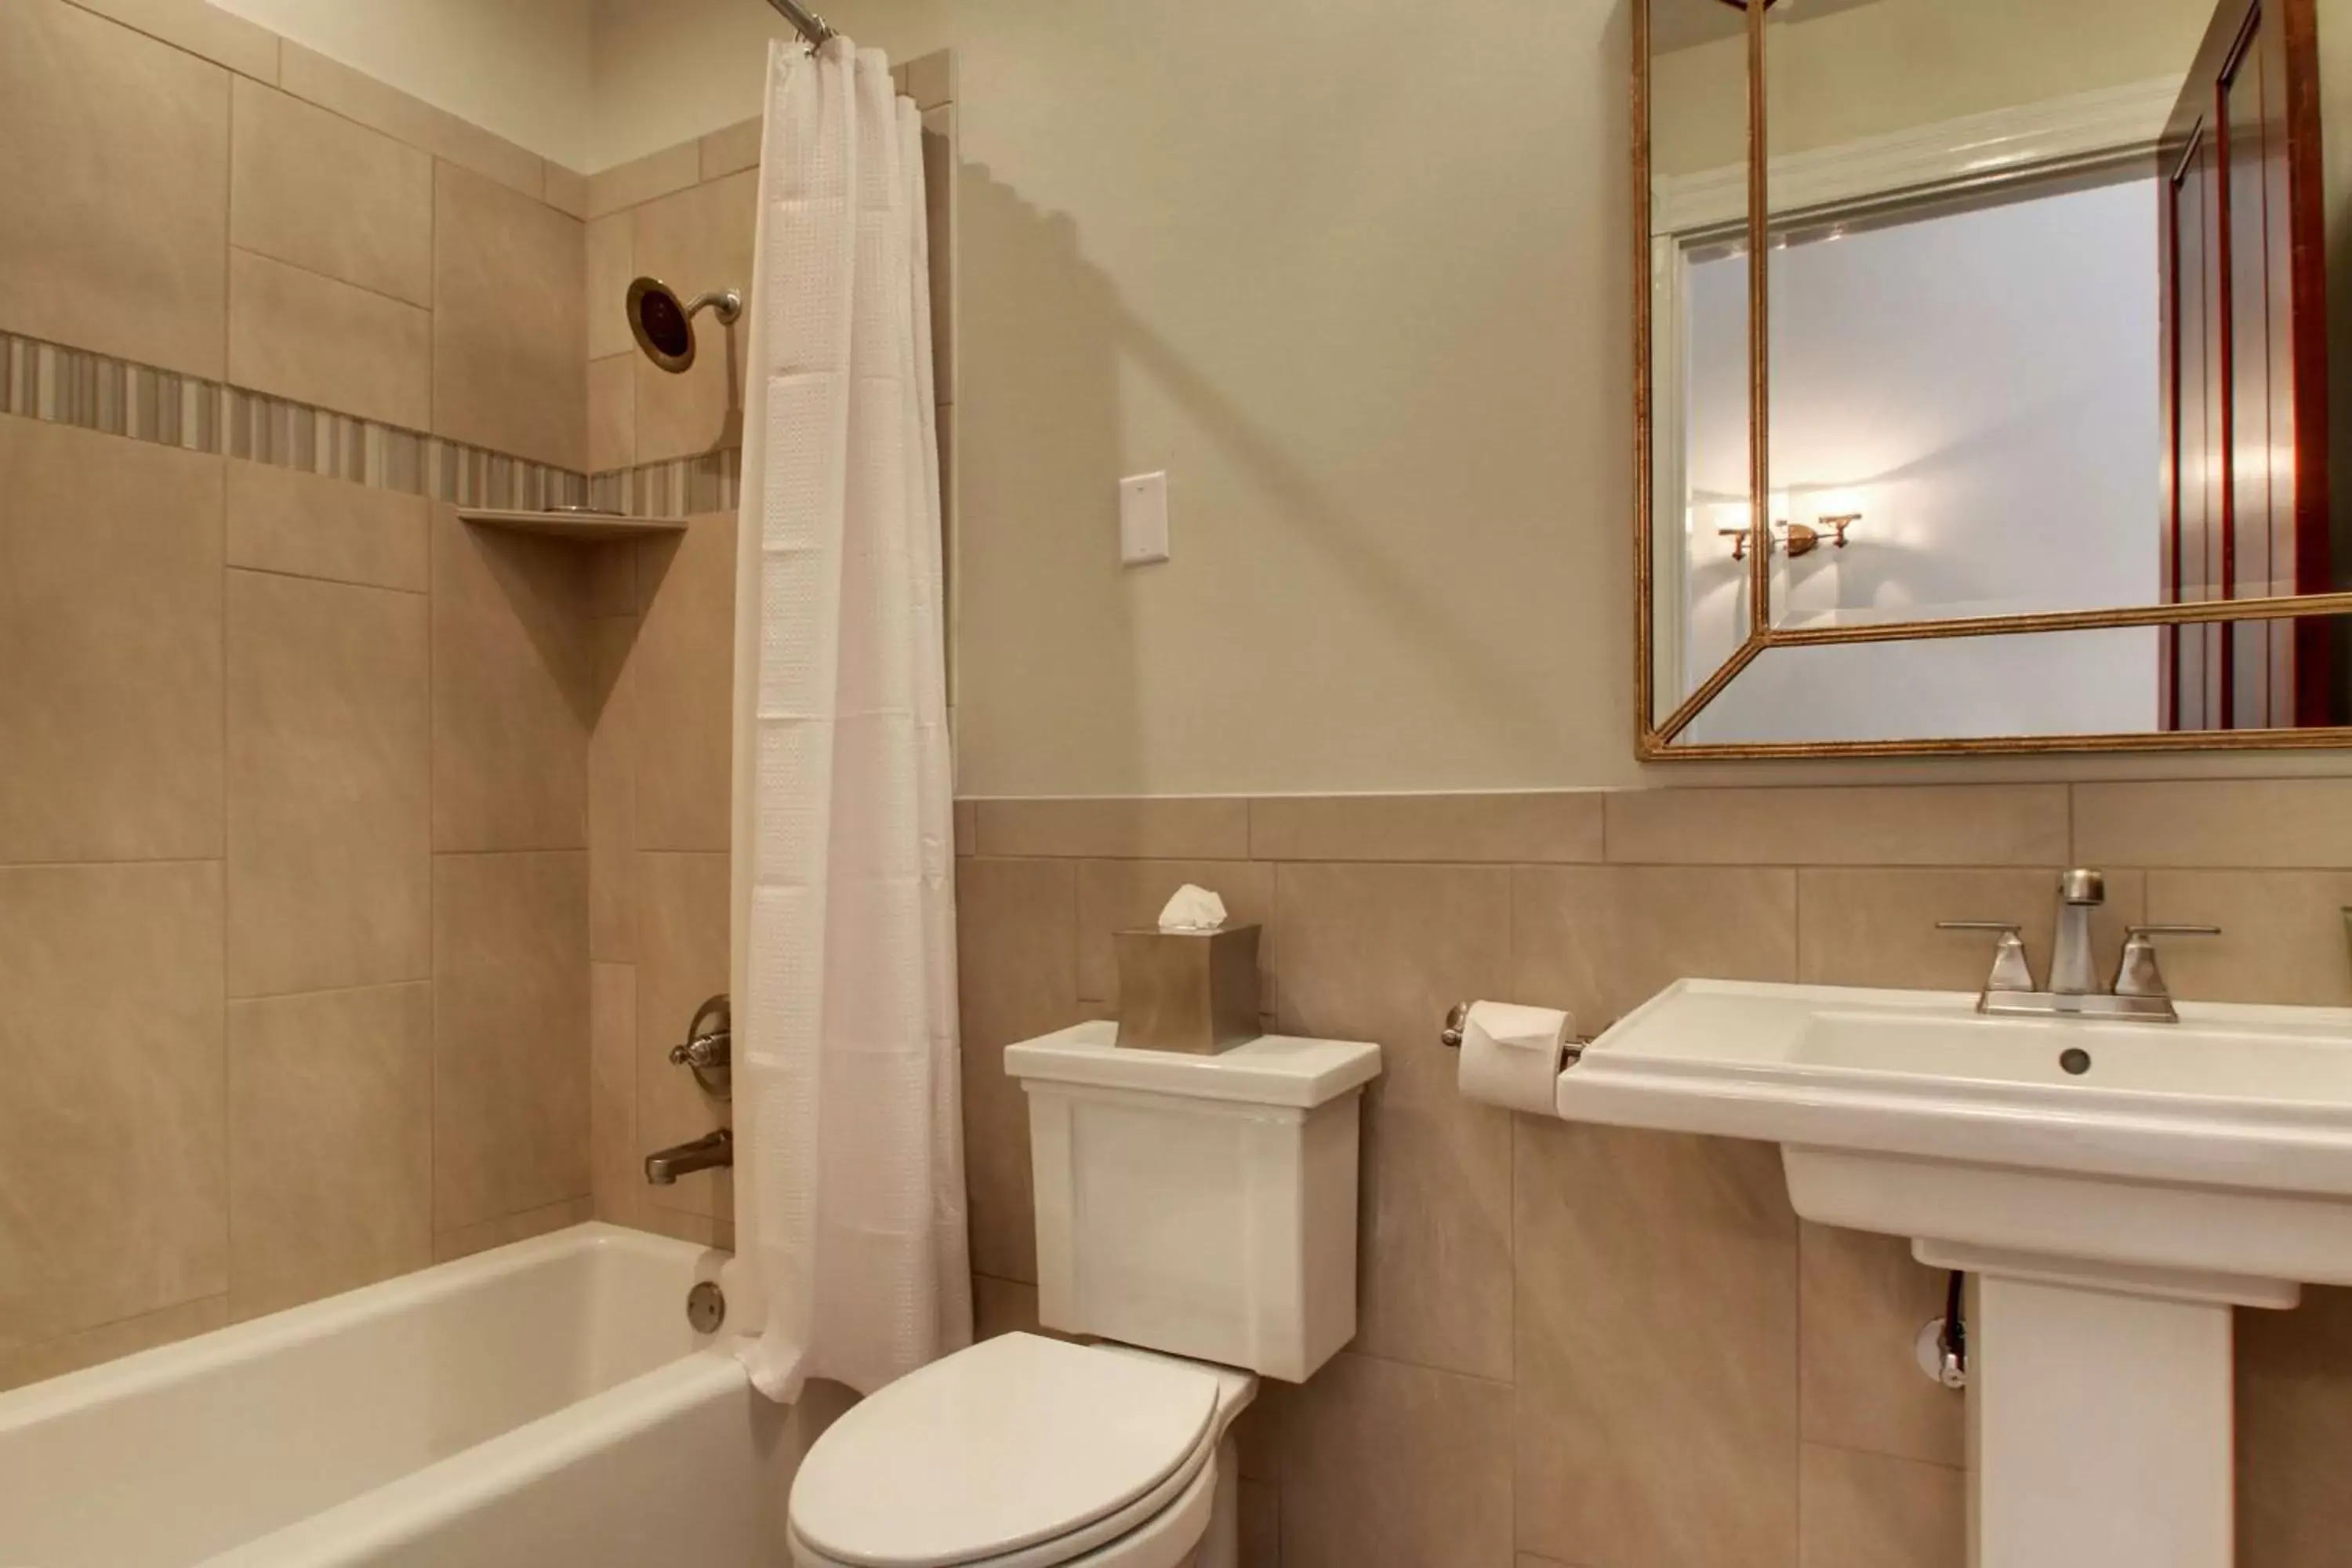 Bathroom in Hotel Finial BW Premier Collection Oxford - Anniston